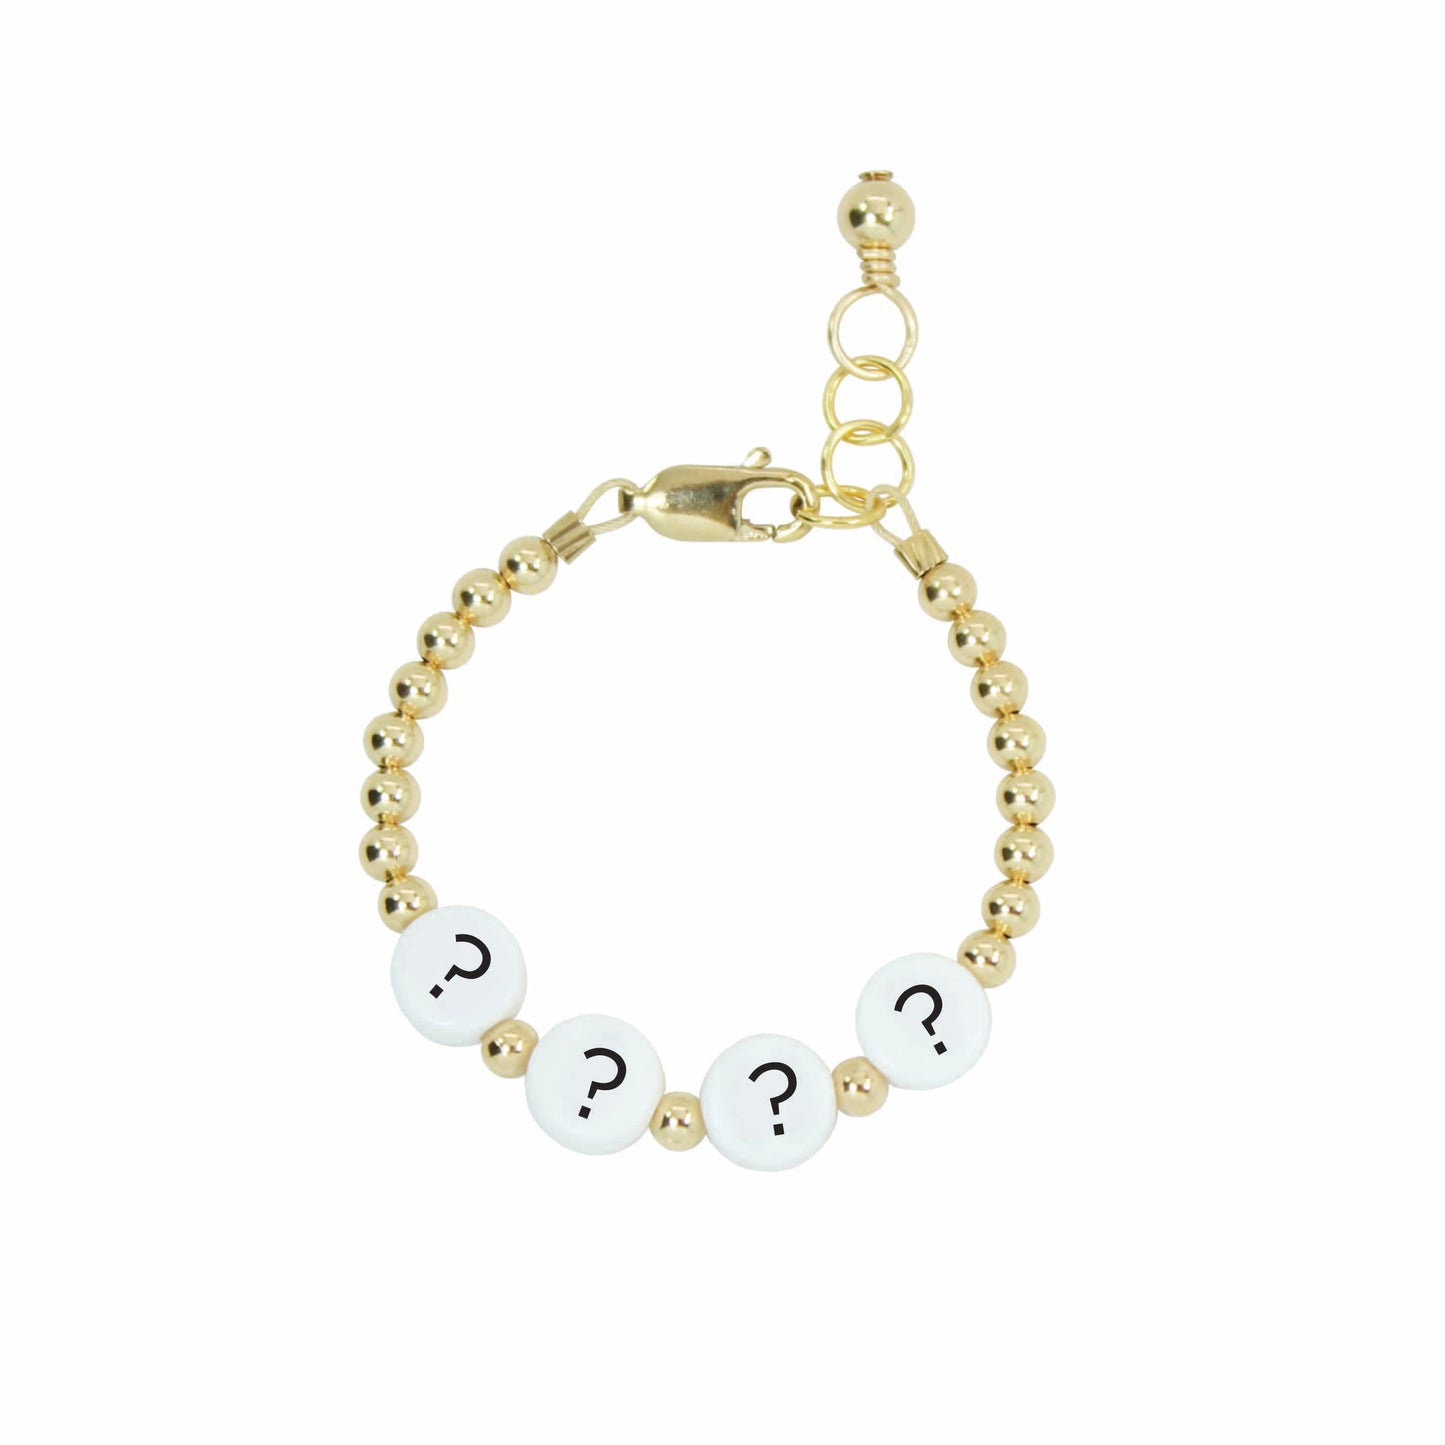 aprococo - CHANEL chain bracelet with Letters spelling C-H-A-N-E-L